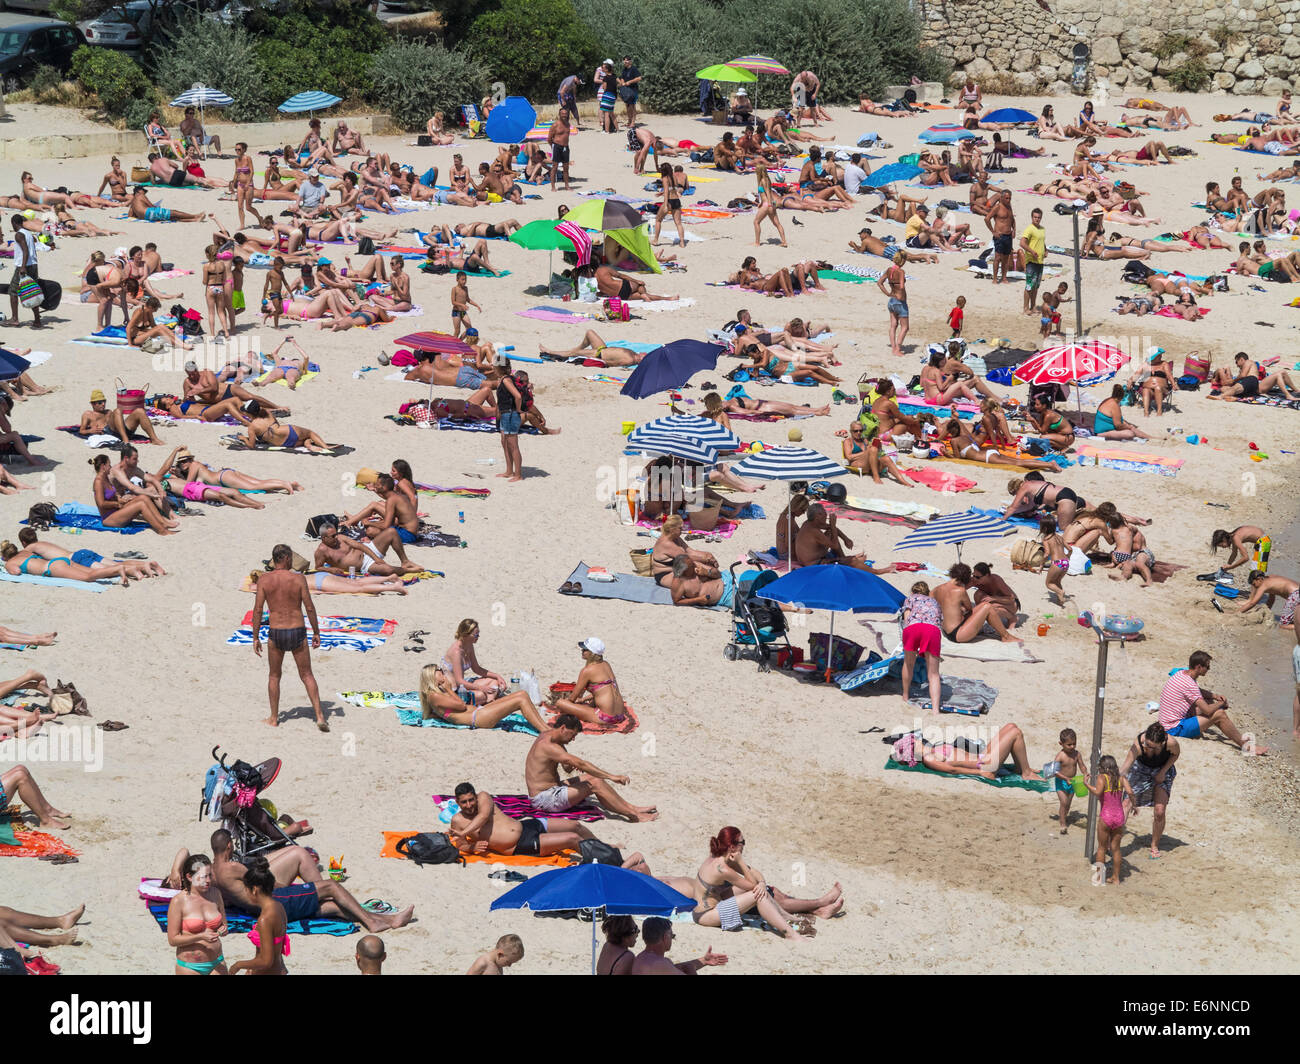 Crowd Of People Sunbathing On The Beach At Antibes Cote D Azur